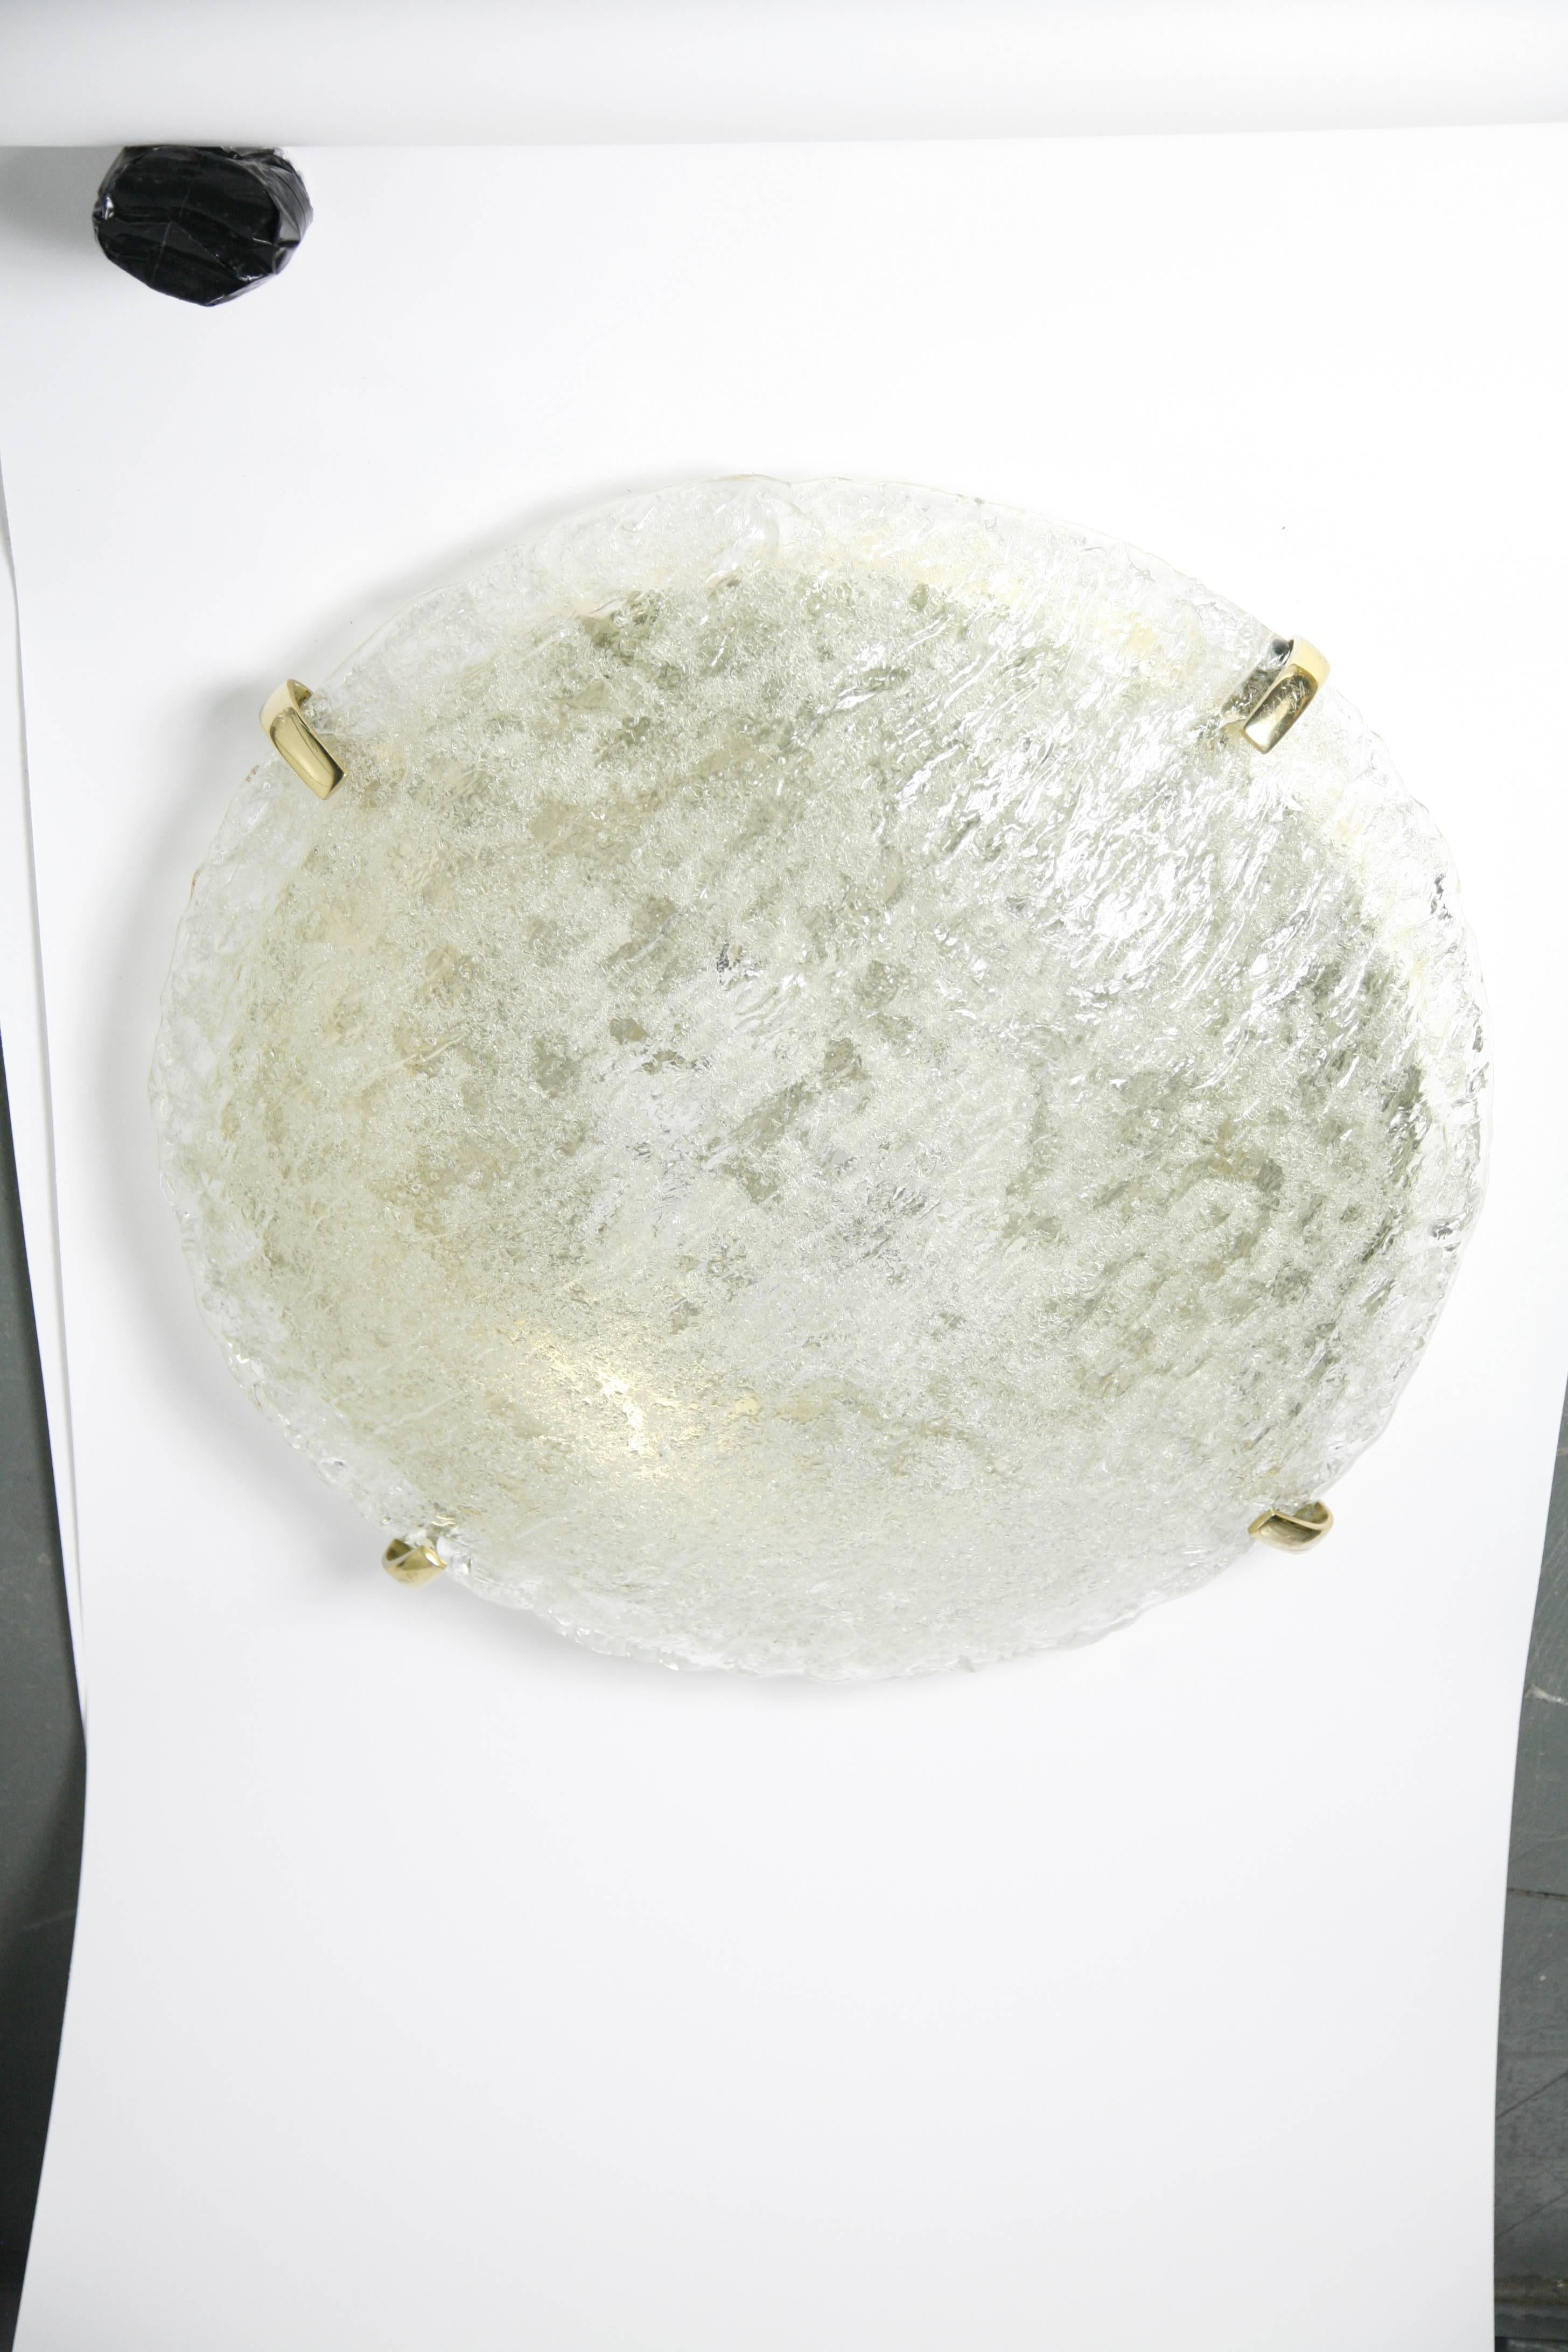 Flush mount by Kaiser, Germany, 1980 a round clear glass diffuser dome shaped thick and heavy glass that is smooth on the outside and matte on the inside four brass finials, eight European sockets on a brass frame.
On the inside of the glass is in